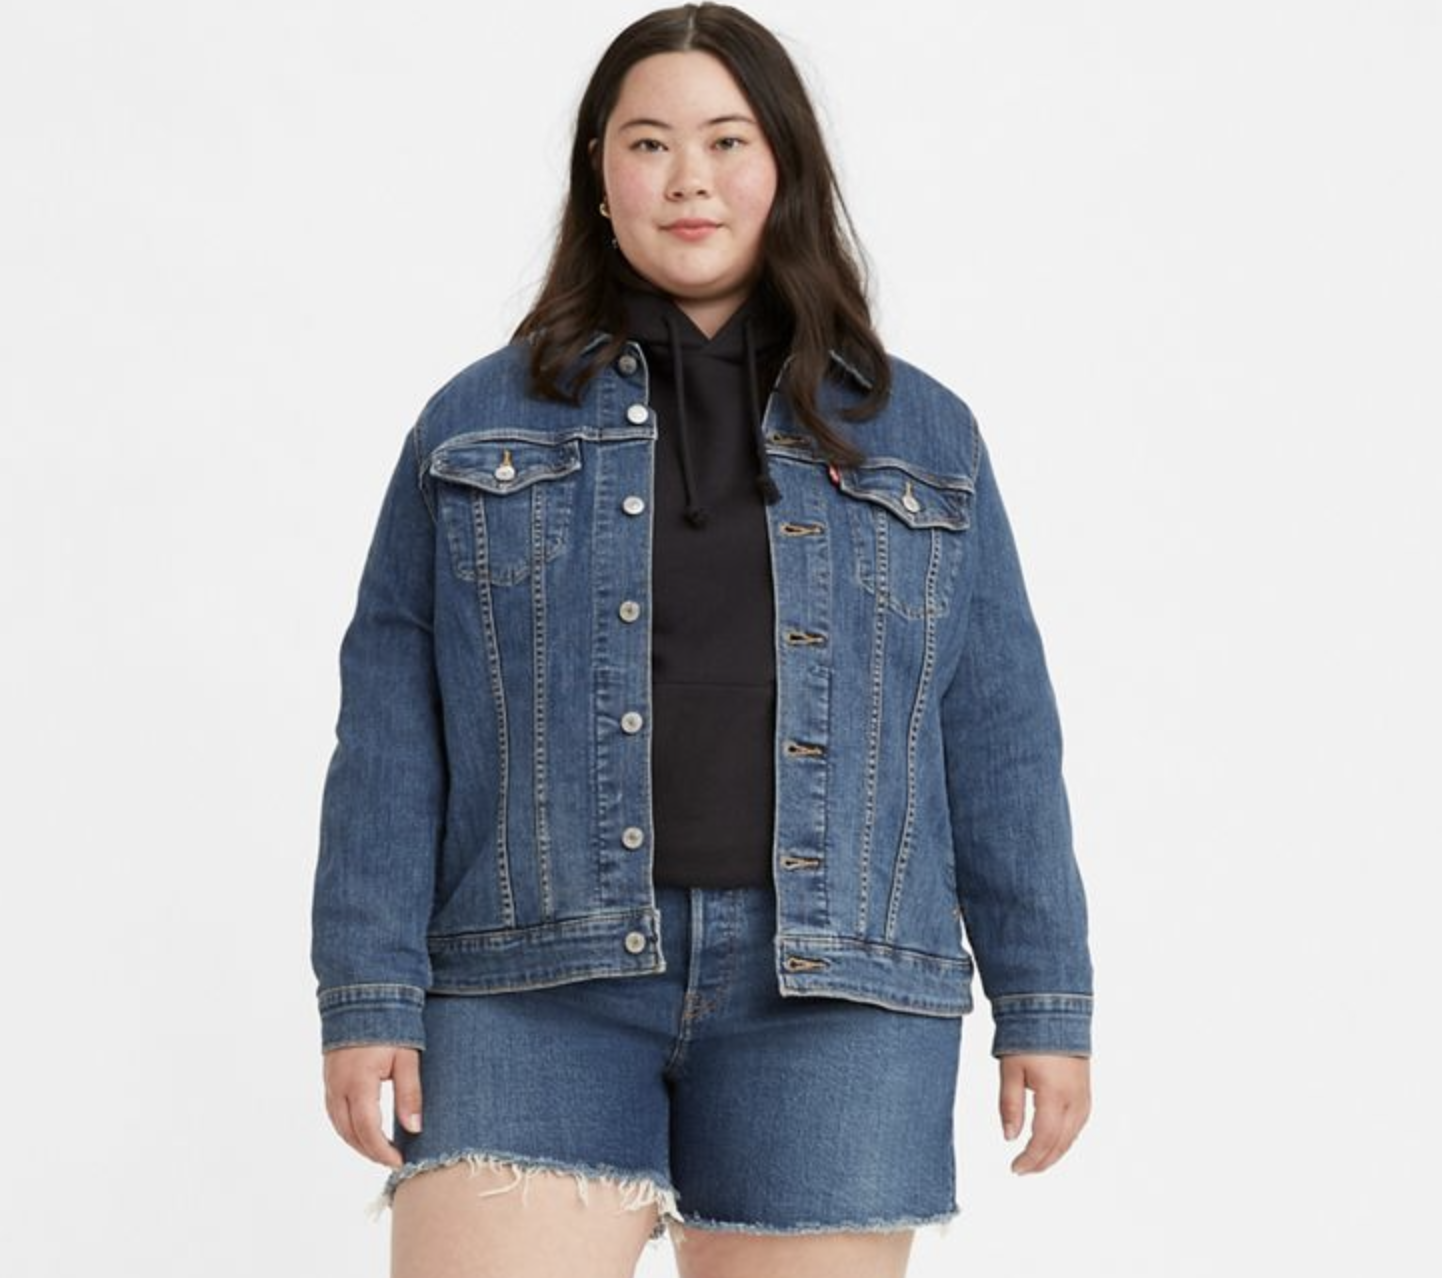 a model wearing the jacket over a sweater and matching denim shorts